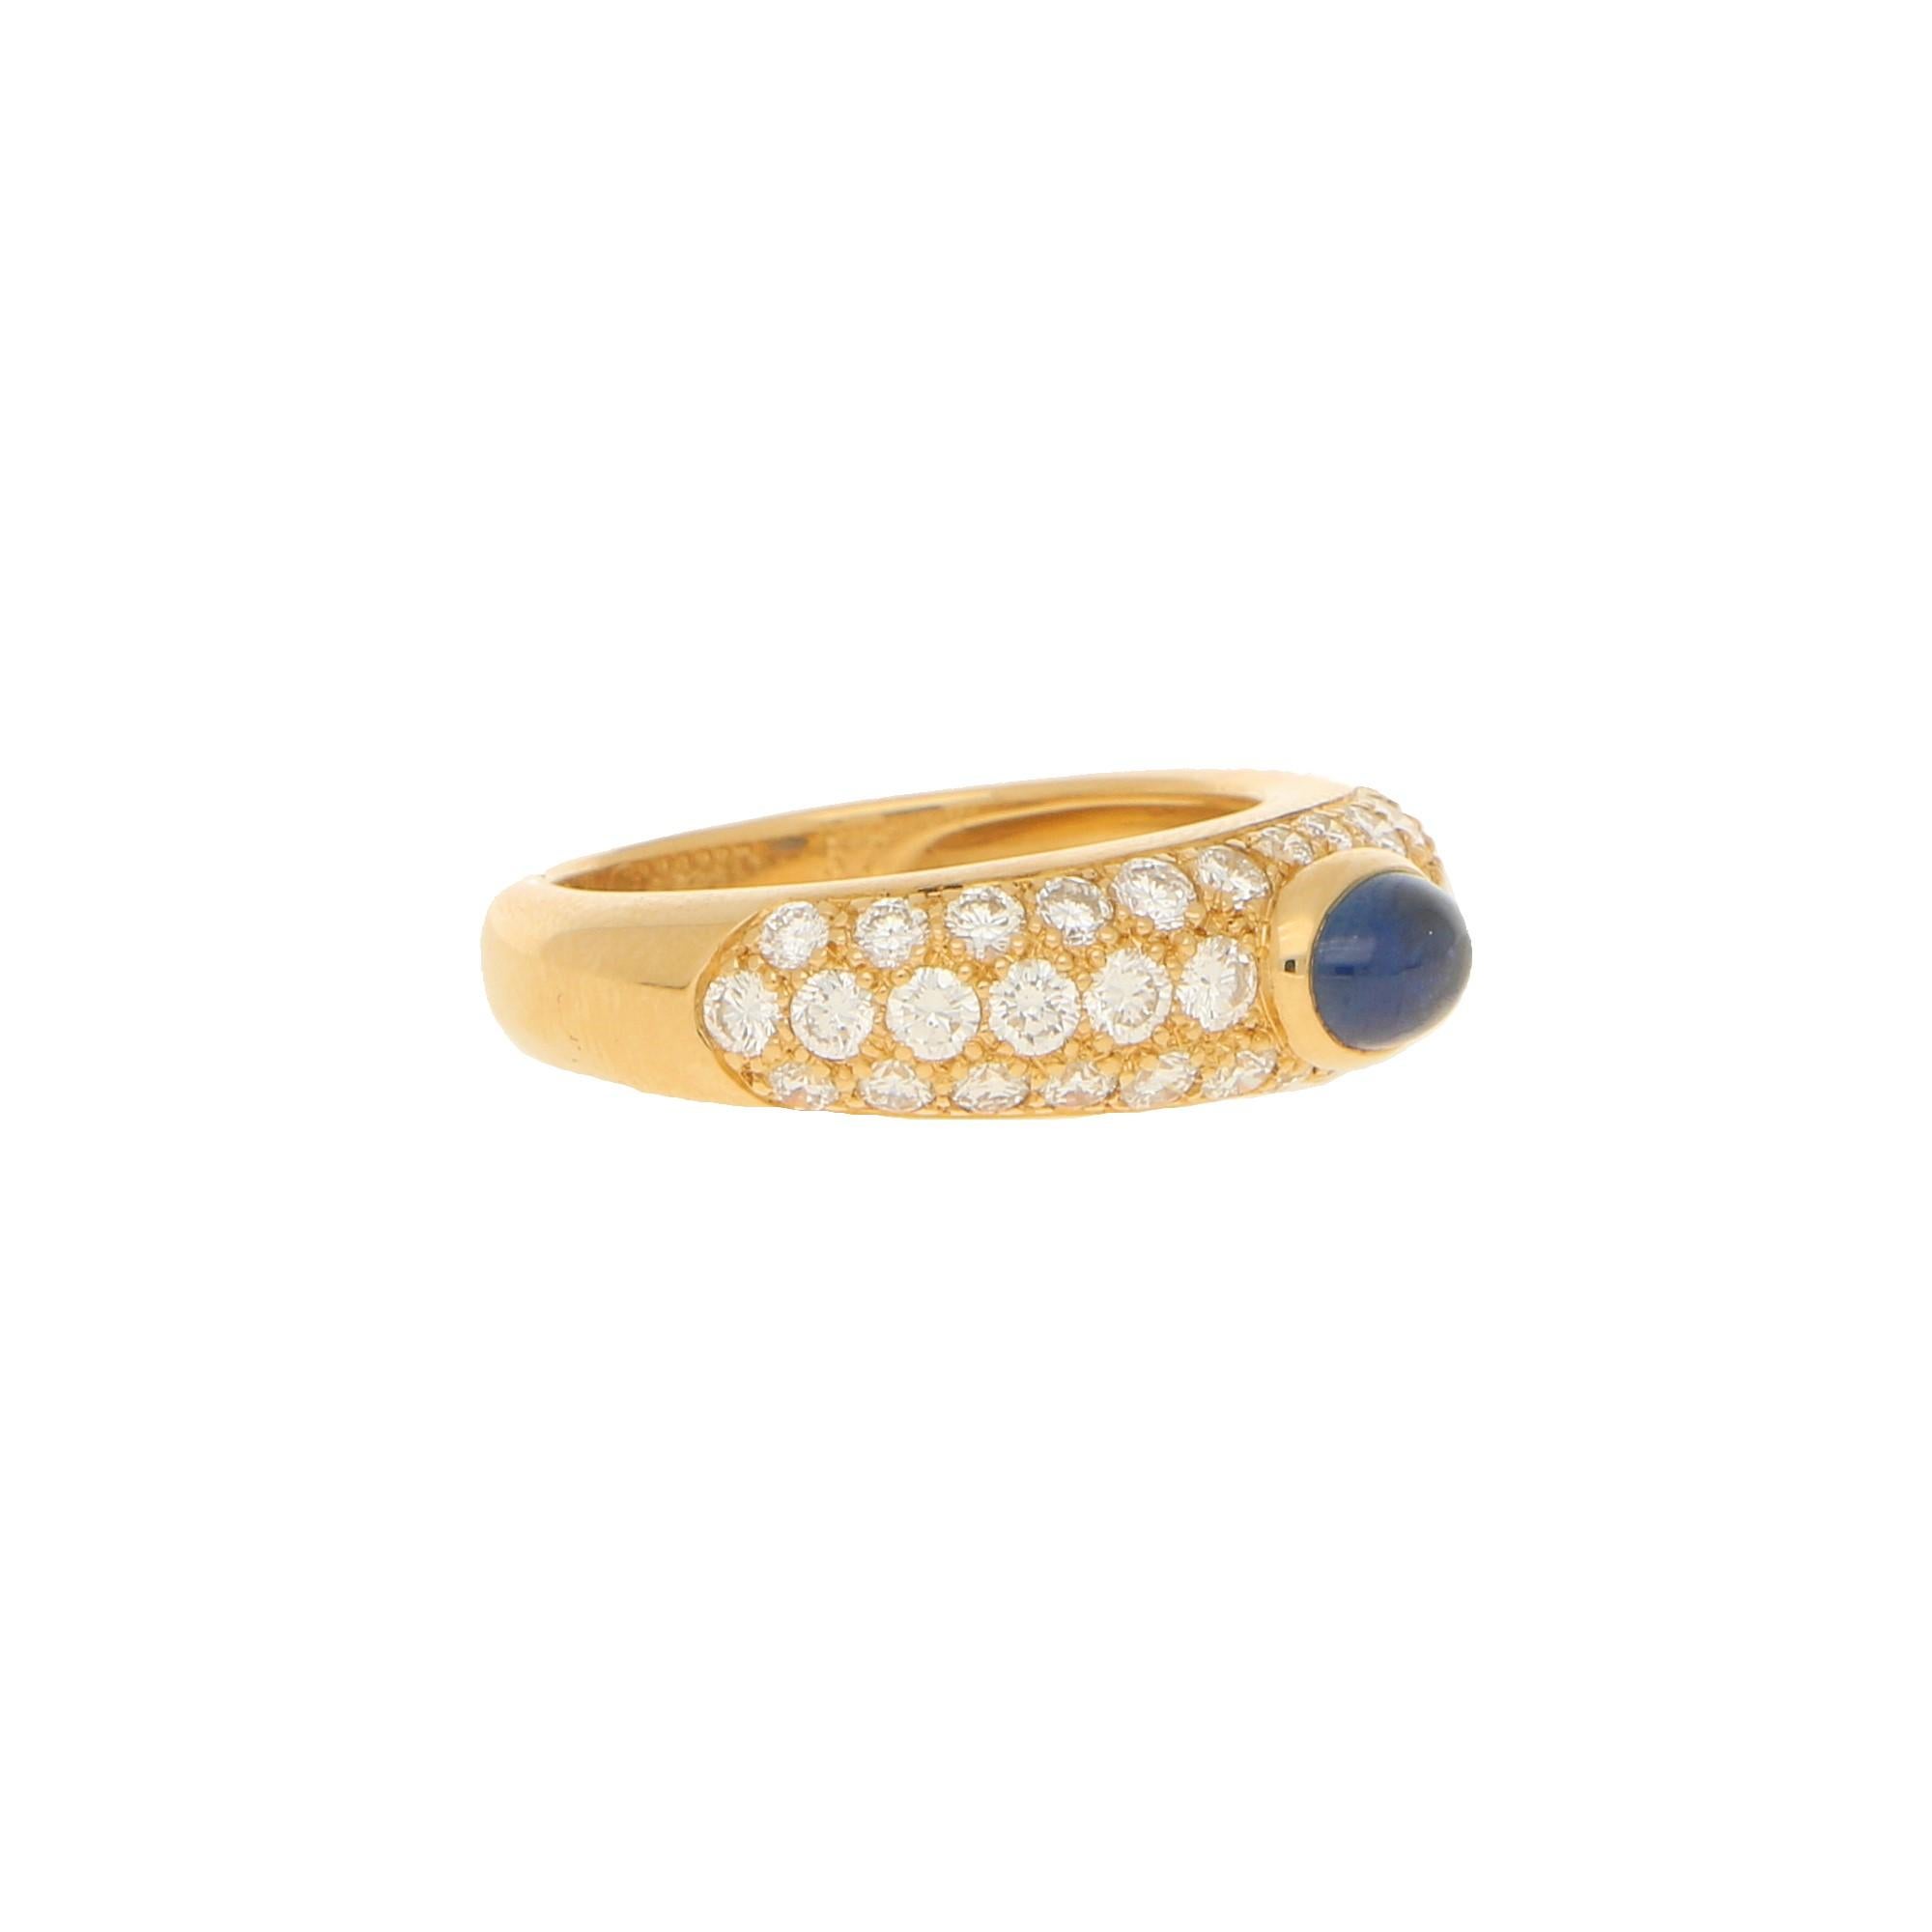 vintage cartier sapphire ring